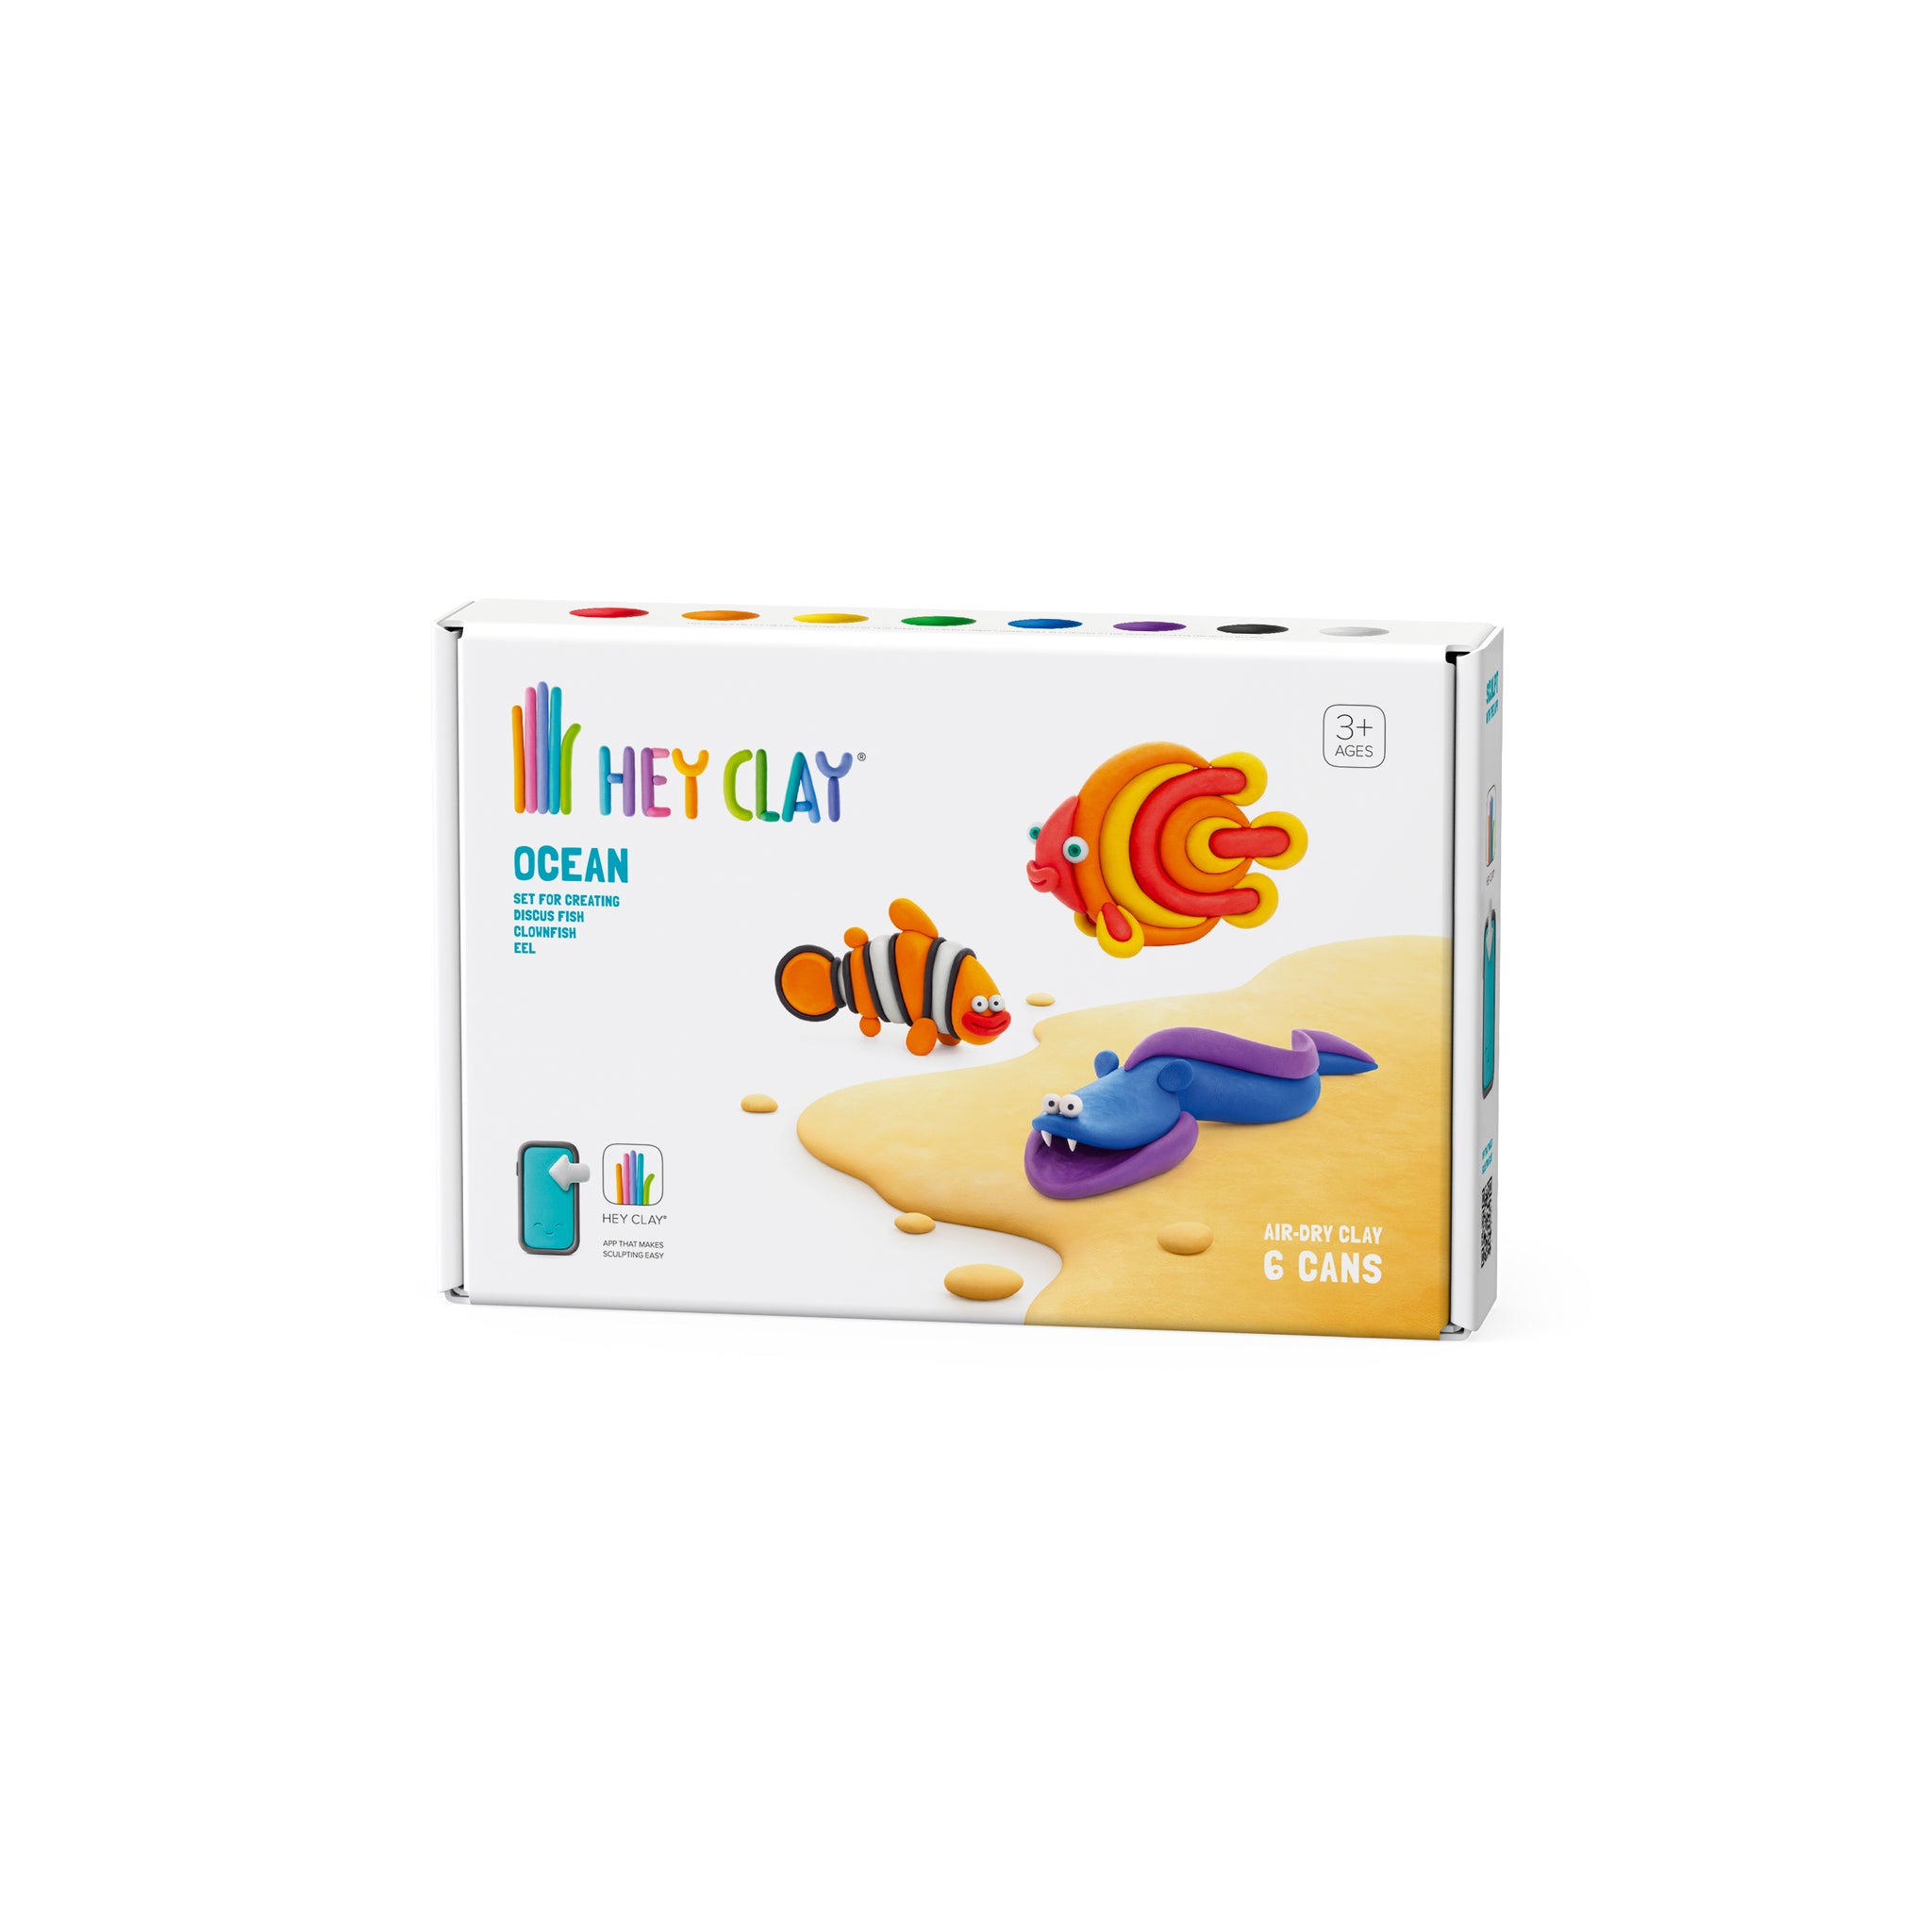 HEY CLAY - OCEAN (CLOWNFISH, DISCUS, FISH, EEL), 6 CANS – Logical Toys